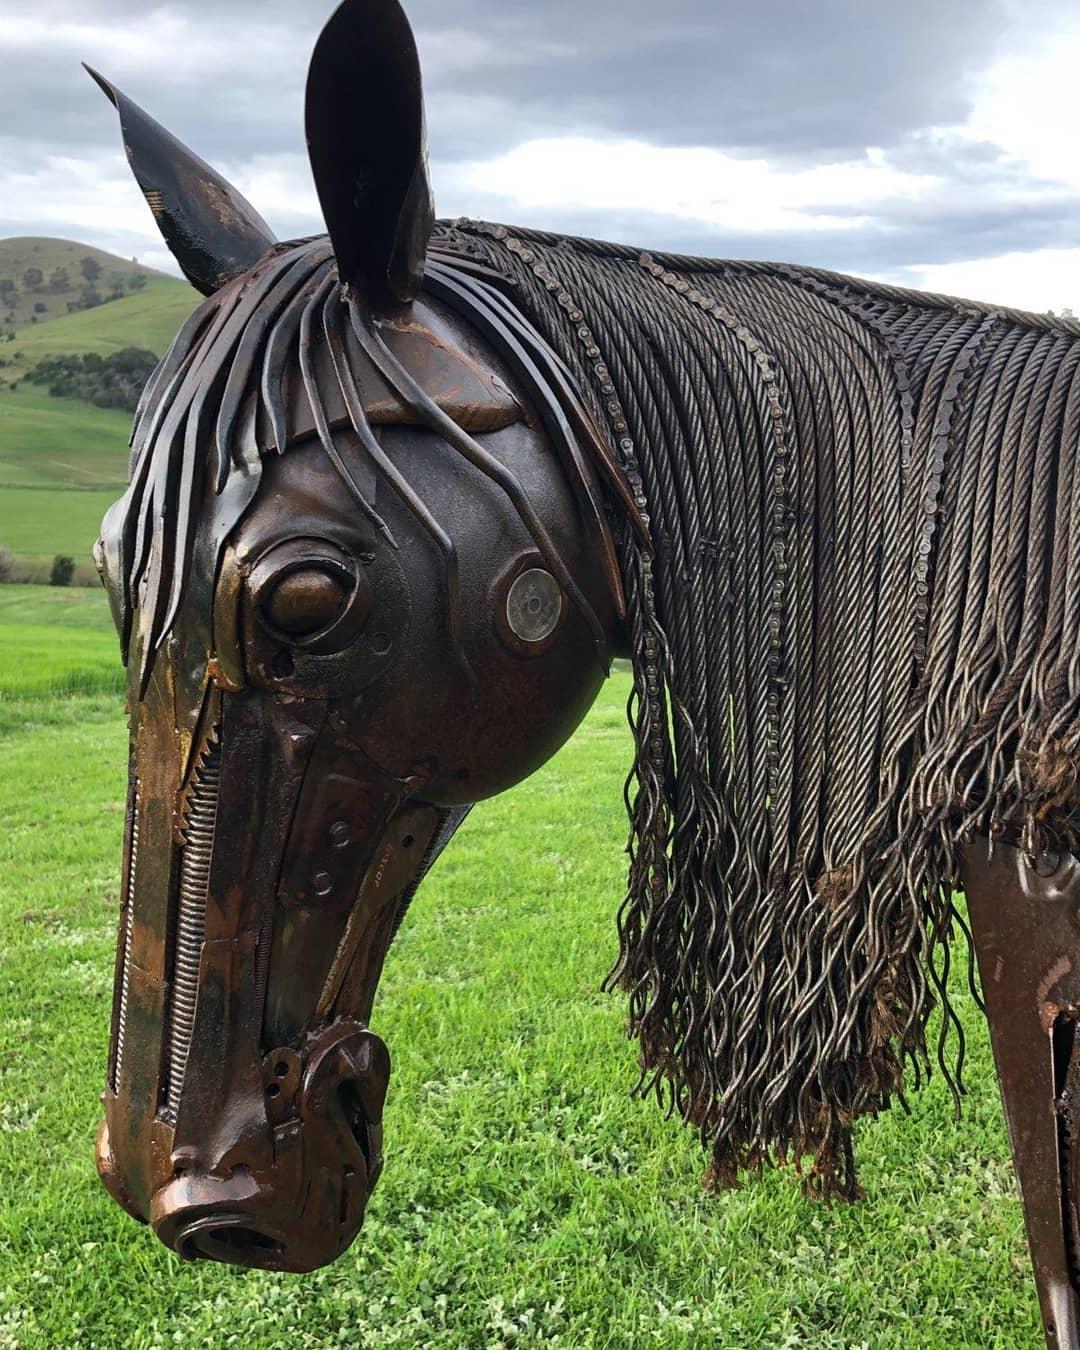 A close-up view of the head and mane. (Courtesy of <a href="https://www.instagram.com/sloanesculpture/">Matt Sloane</a>)